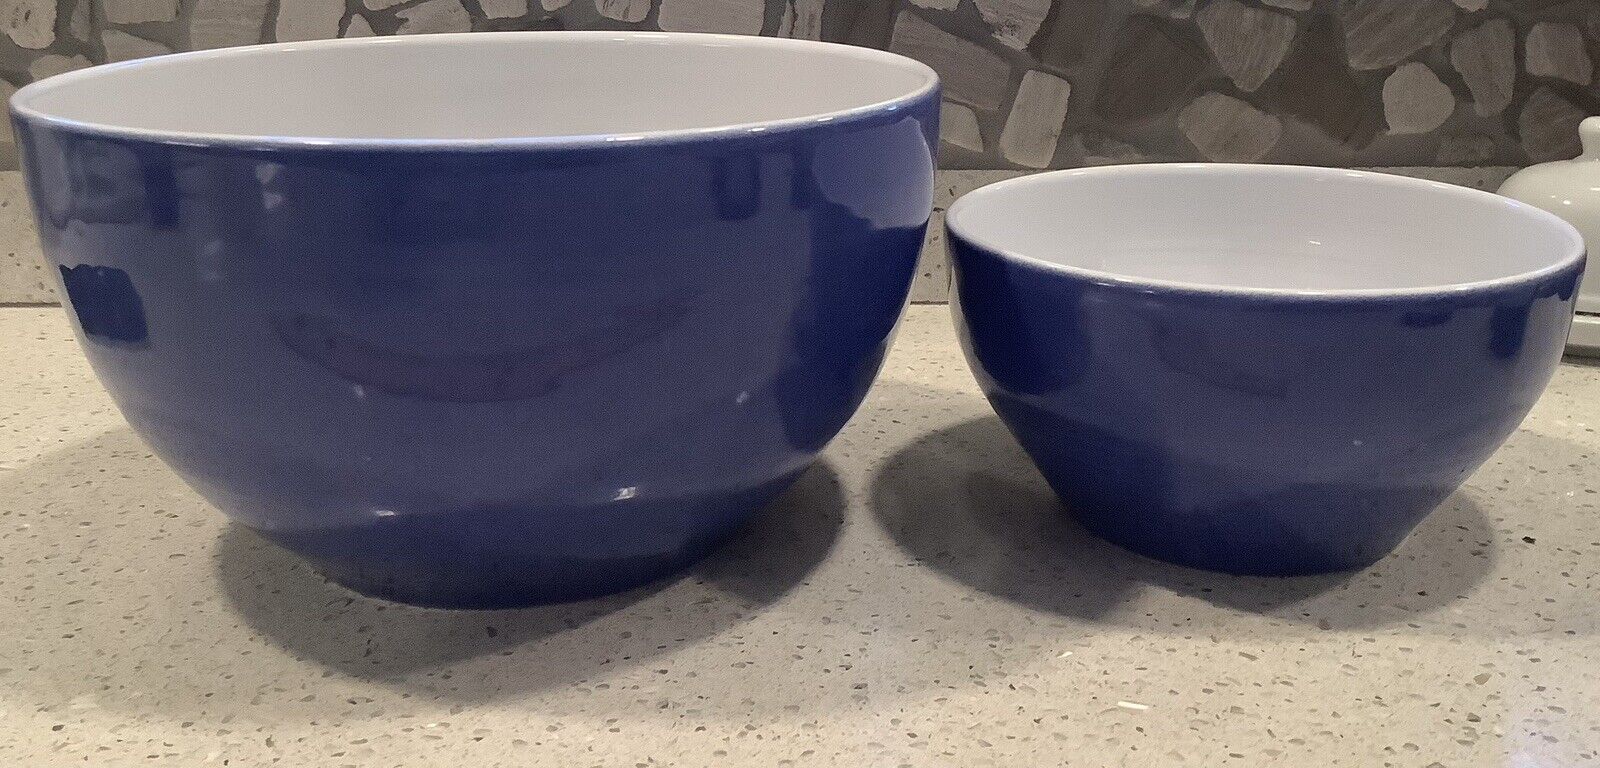 Set Of 2 Excellent Cond. EMILE HENRY BLUE MIXING BOWLS 6502/6504